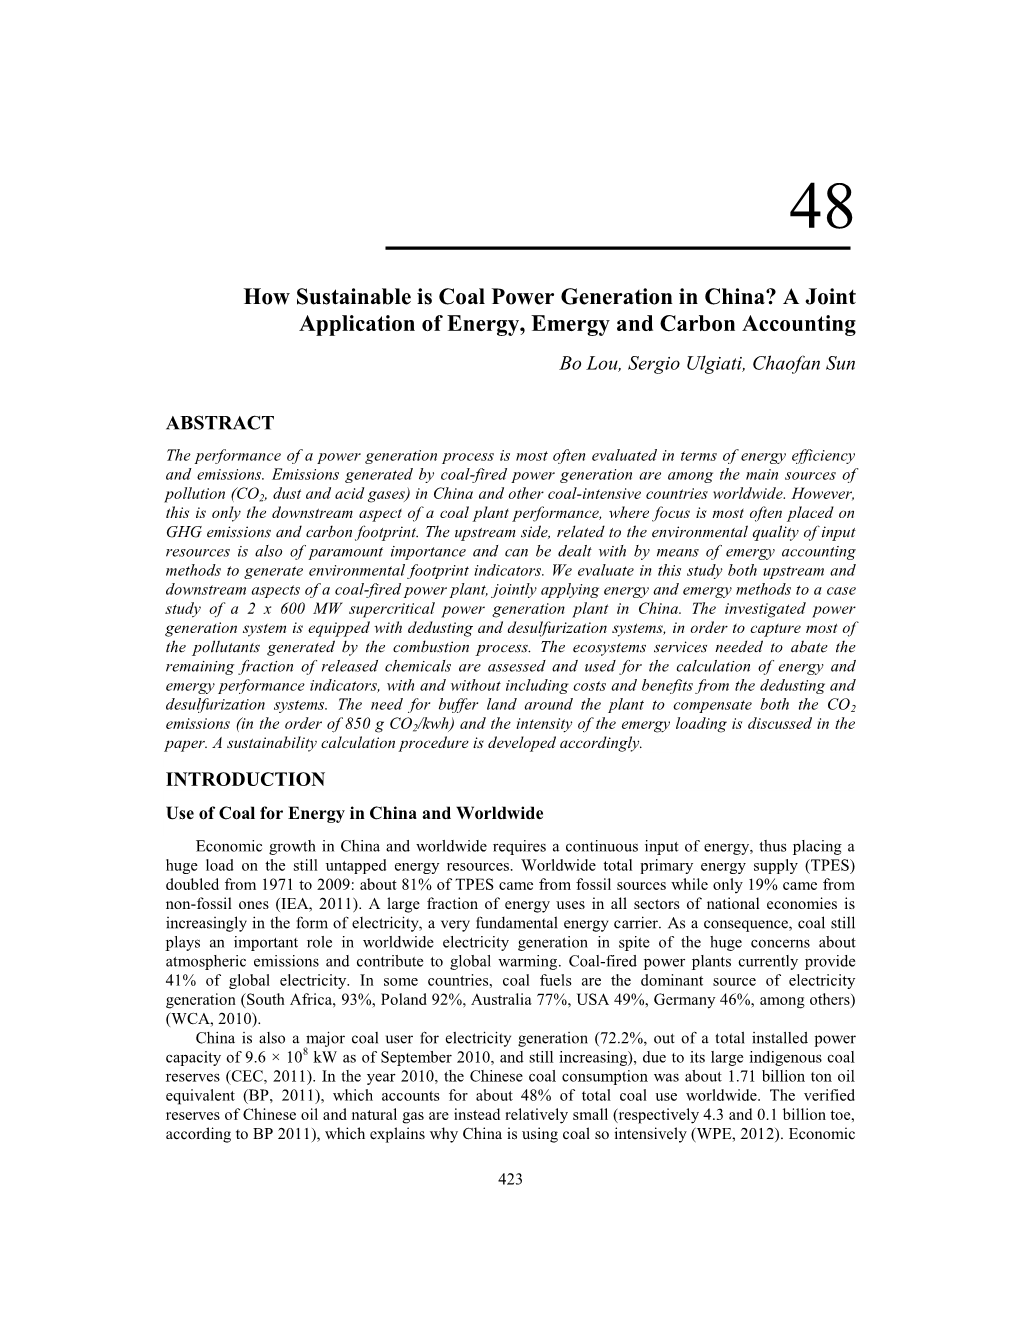 How Sustainable Is Coal Power Generation in China? a Joint Application of Energy, Emergy and Carbon Accounting